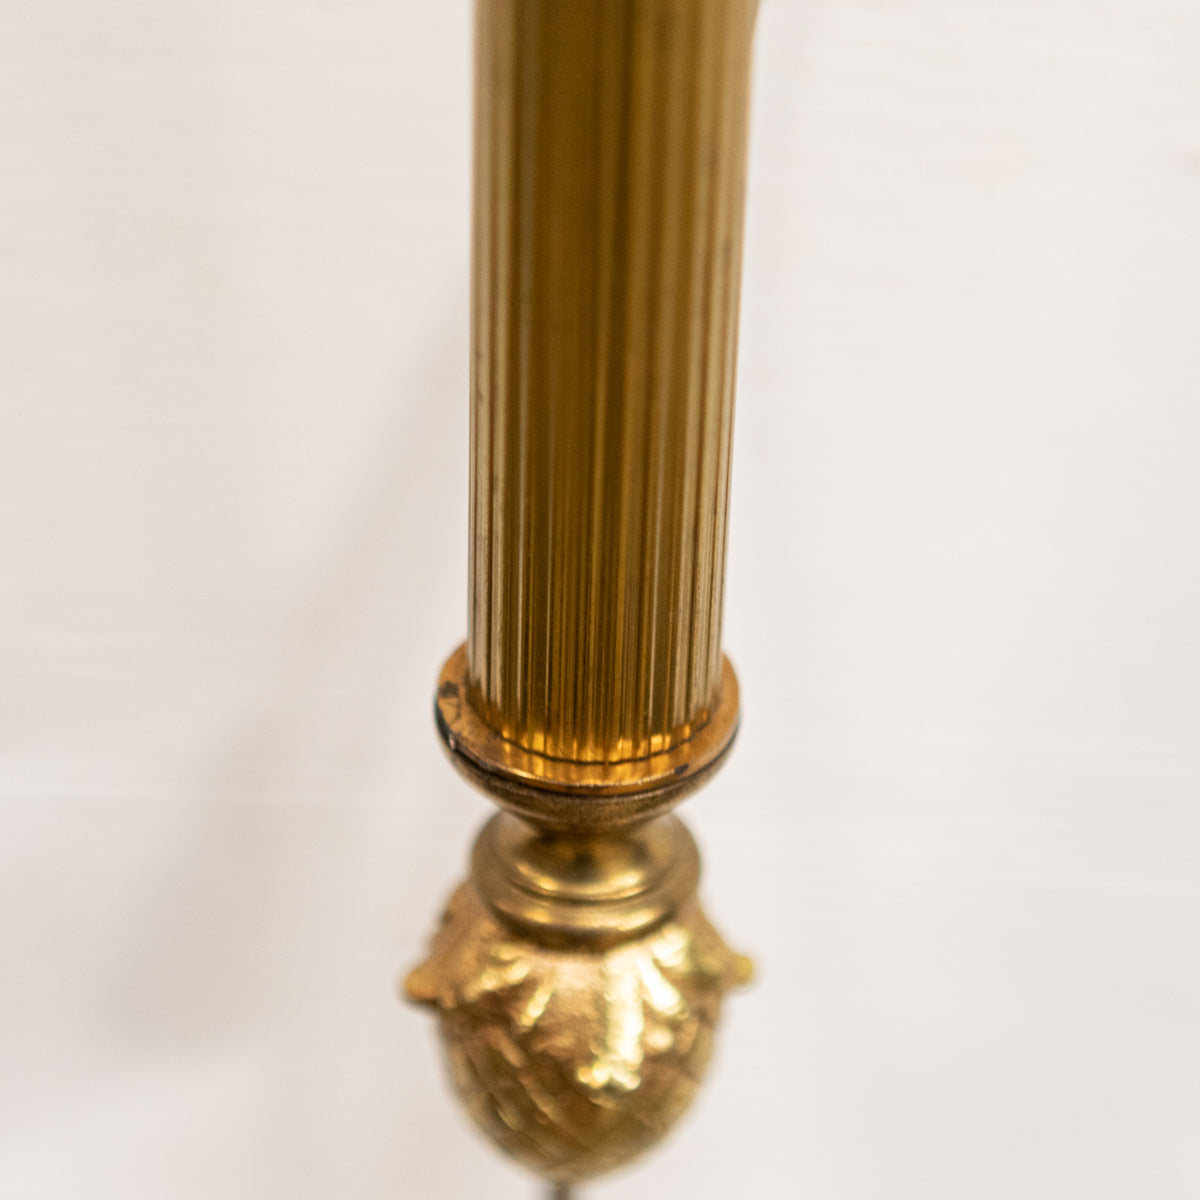 Pair of Antique Wall Sconce Torch Lights with Delicate Etched Glass | The Architectural Forum